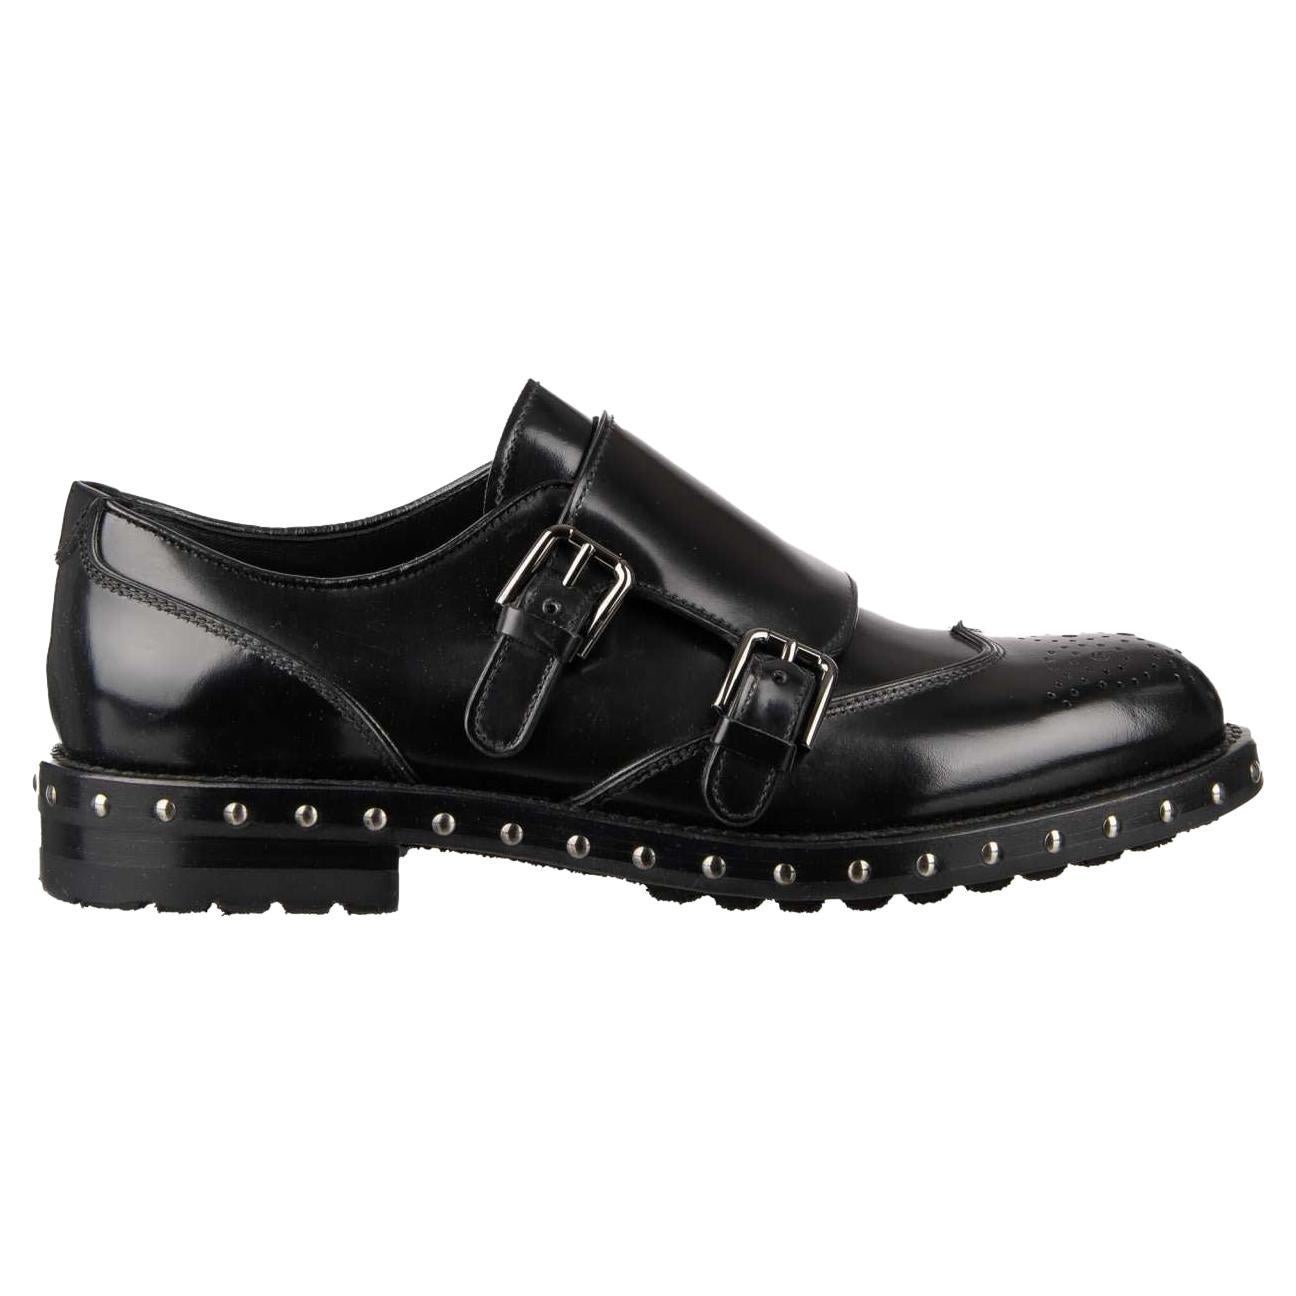 Dolce & Gabbana - Studded Shoes Boots BOY with monk straps Black EUR 40 For Sale